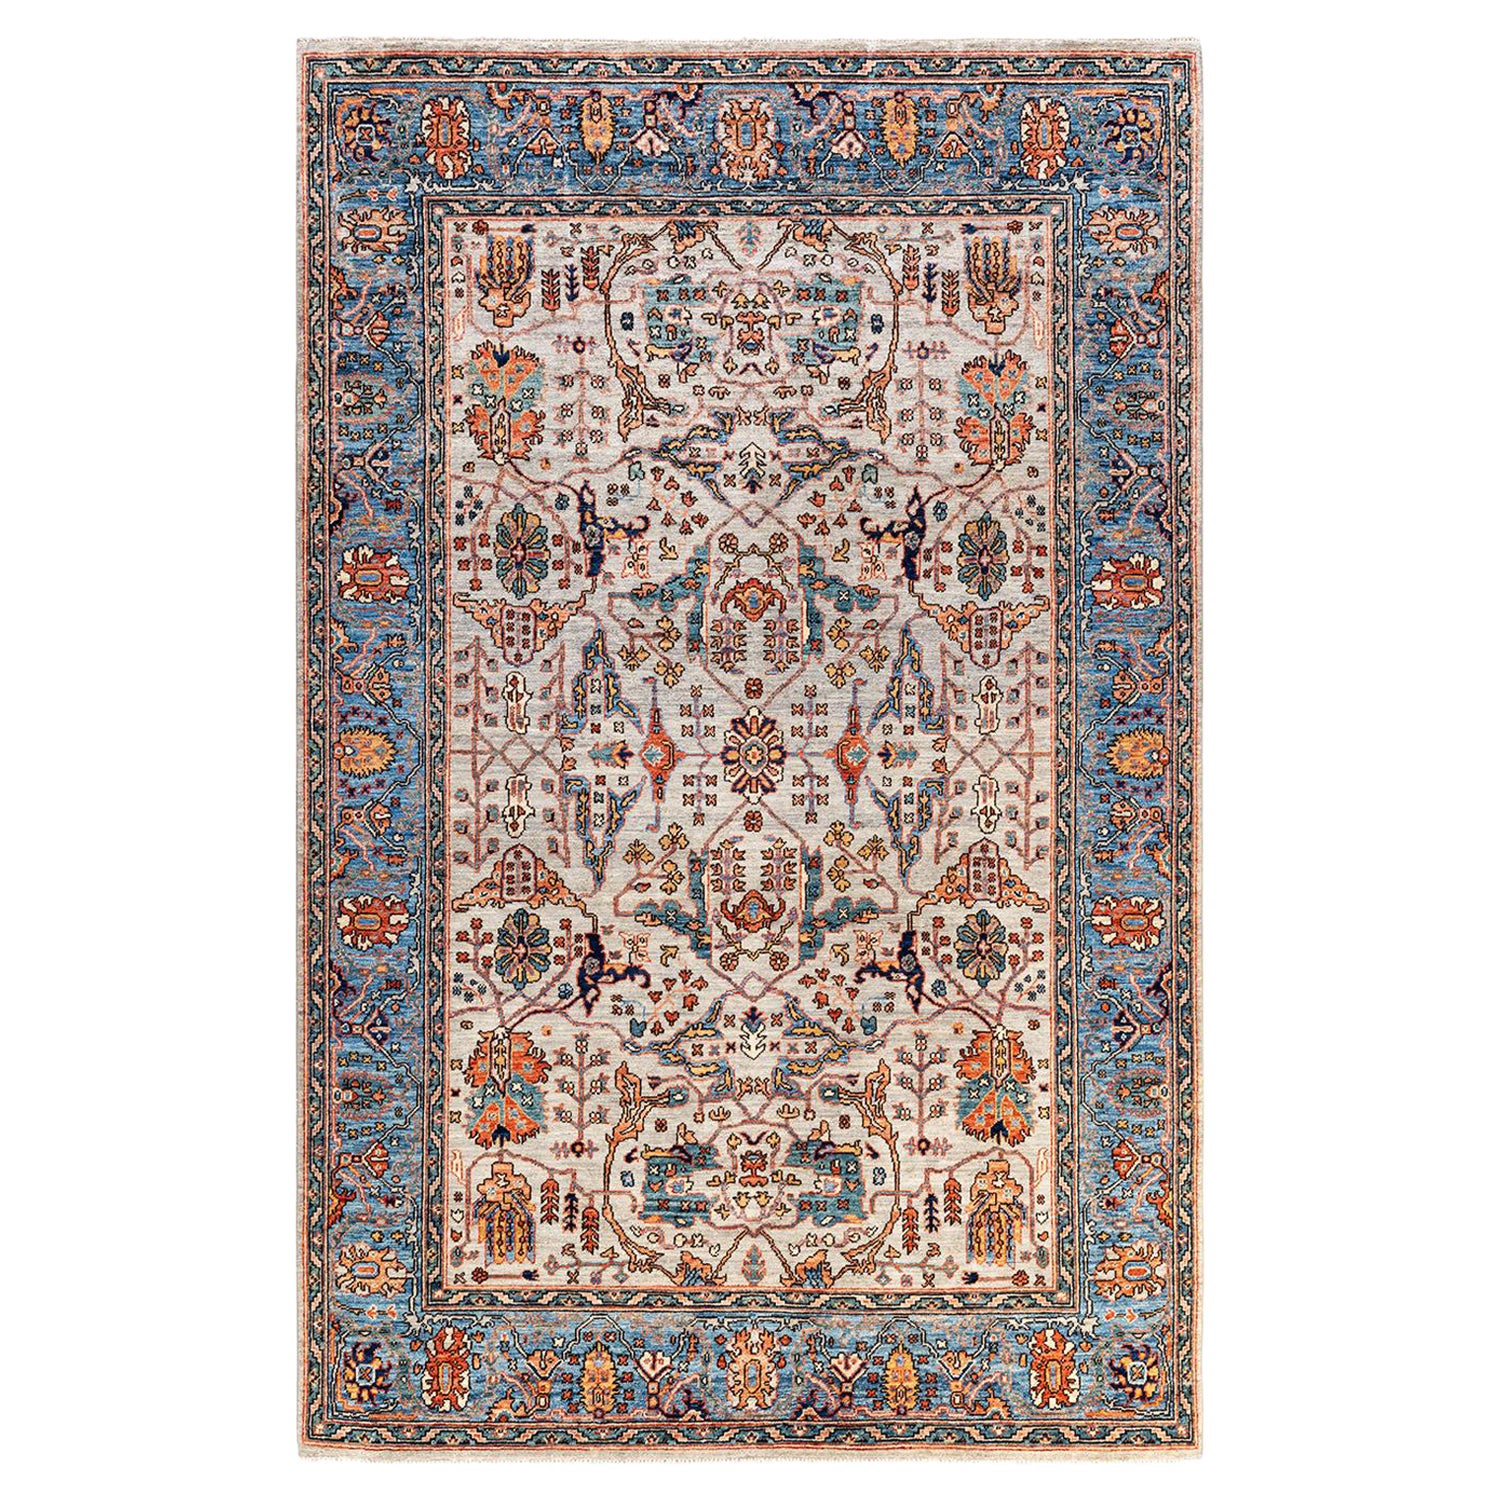 One of a Kind Hand Knotted Traditional Tribal Serapi Gray Area Rug